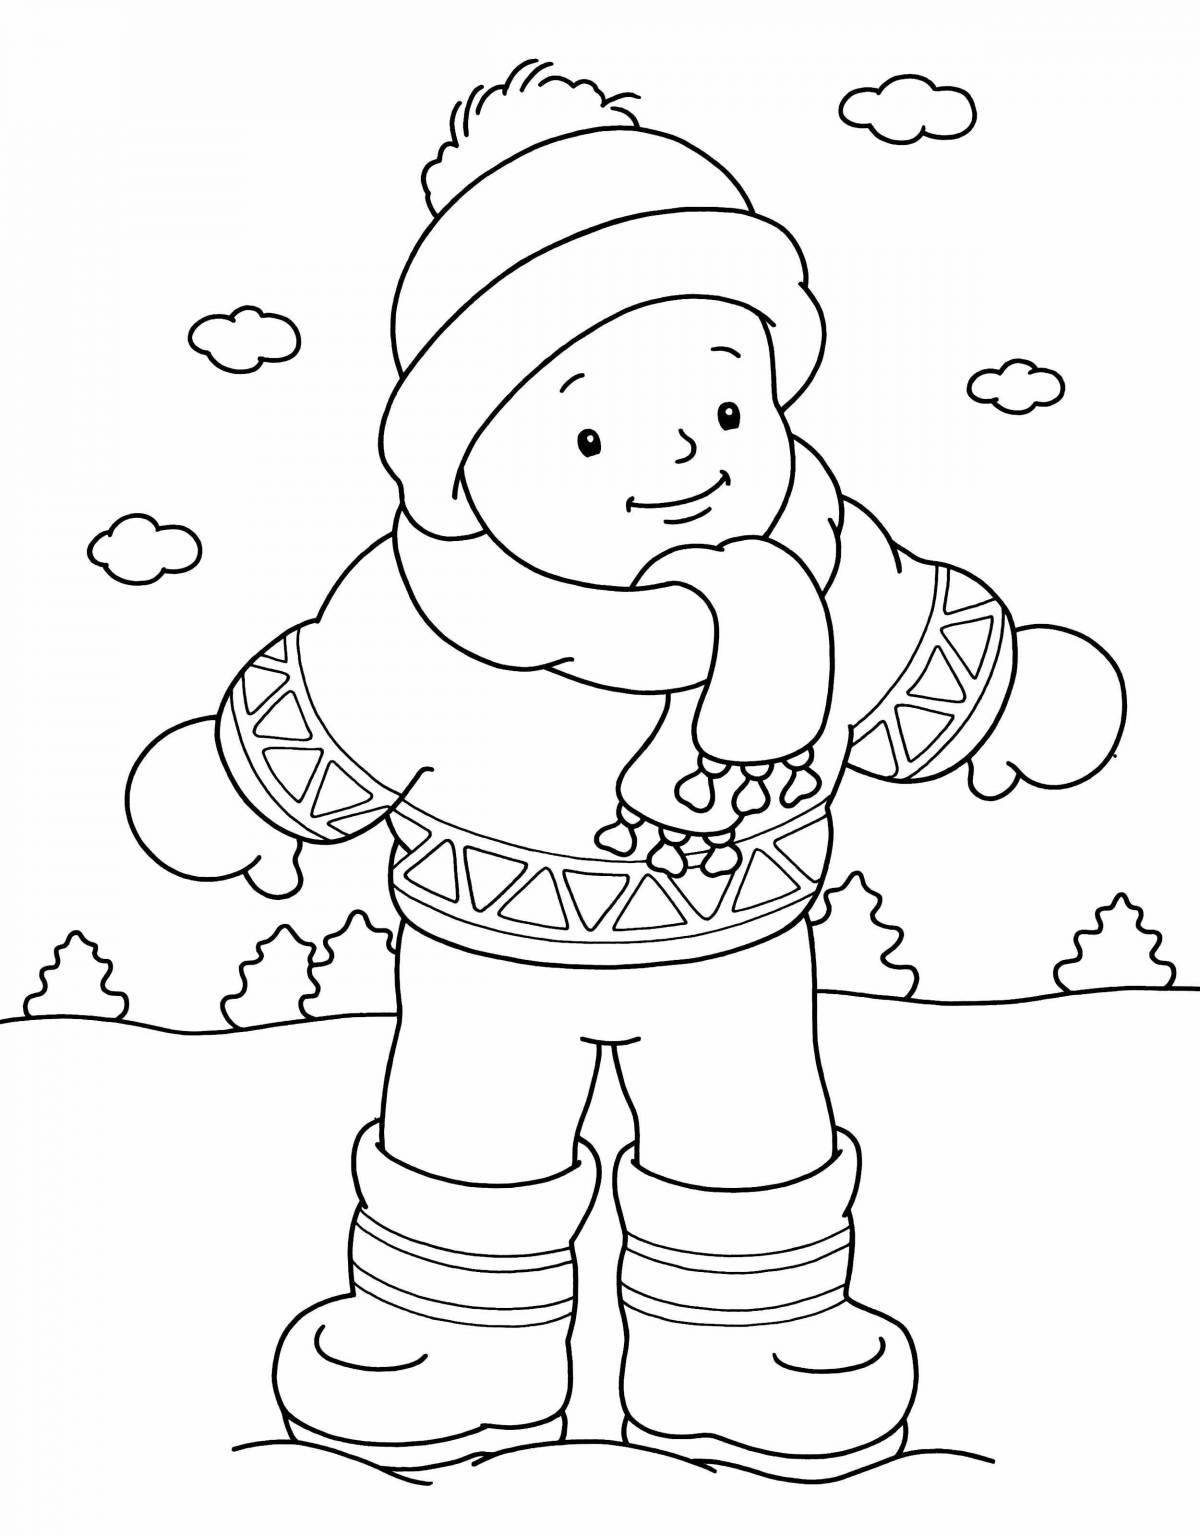 Coloring page snuggled boy in winter clothes